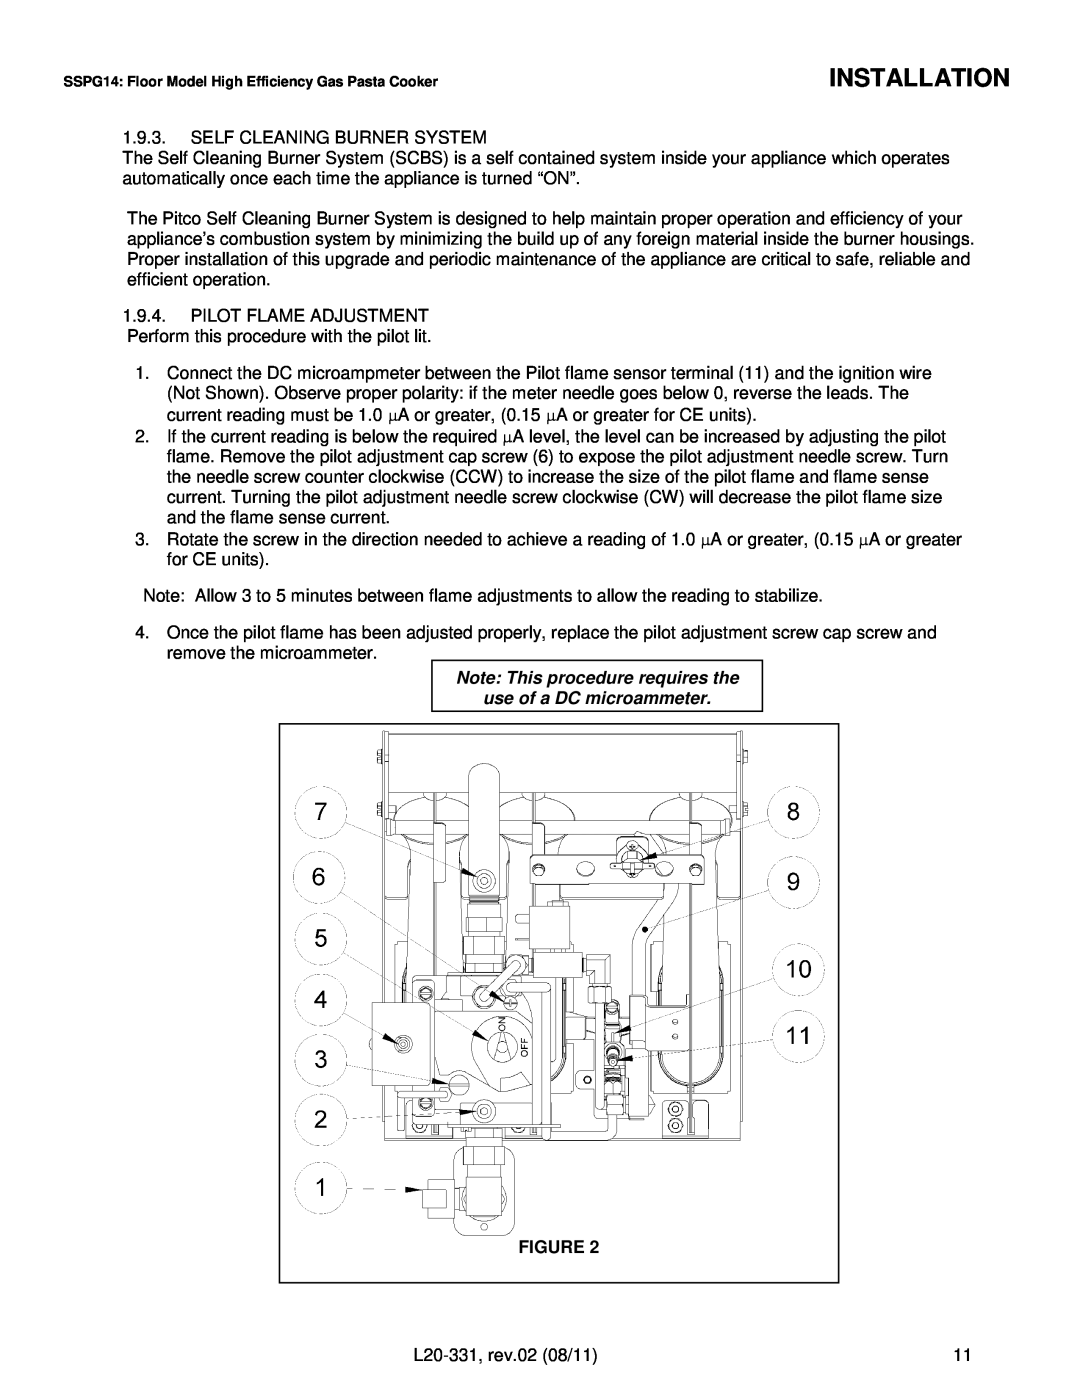 Pitco Frialator SSPG14, SSRS14 operation manual Installation, Note This procedure requires the, use of a DC microammeter 